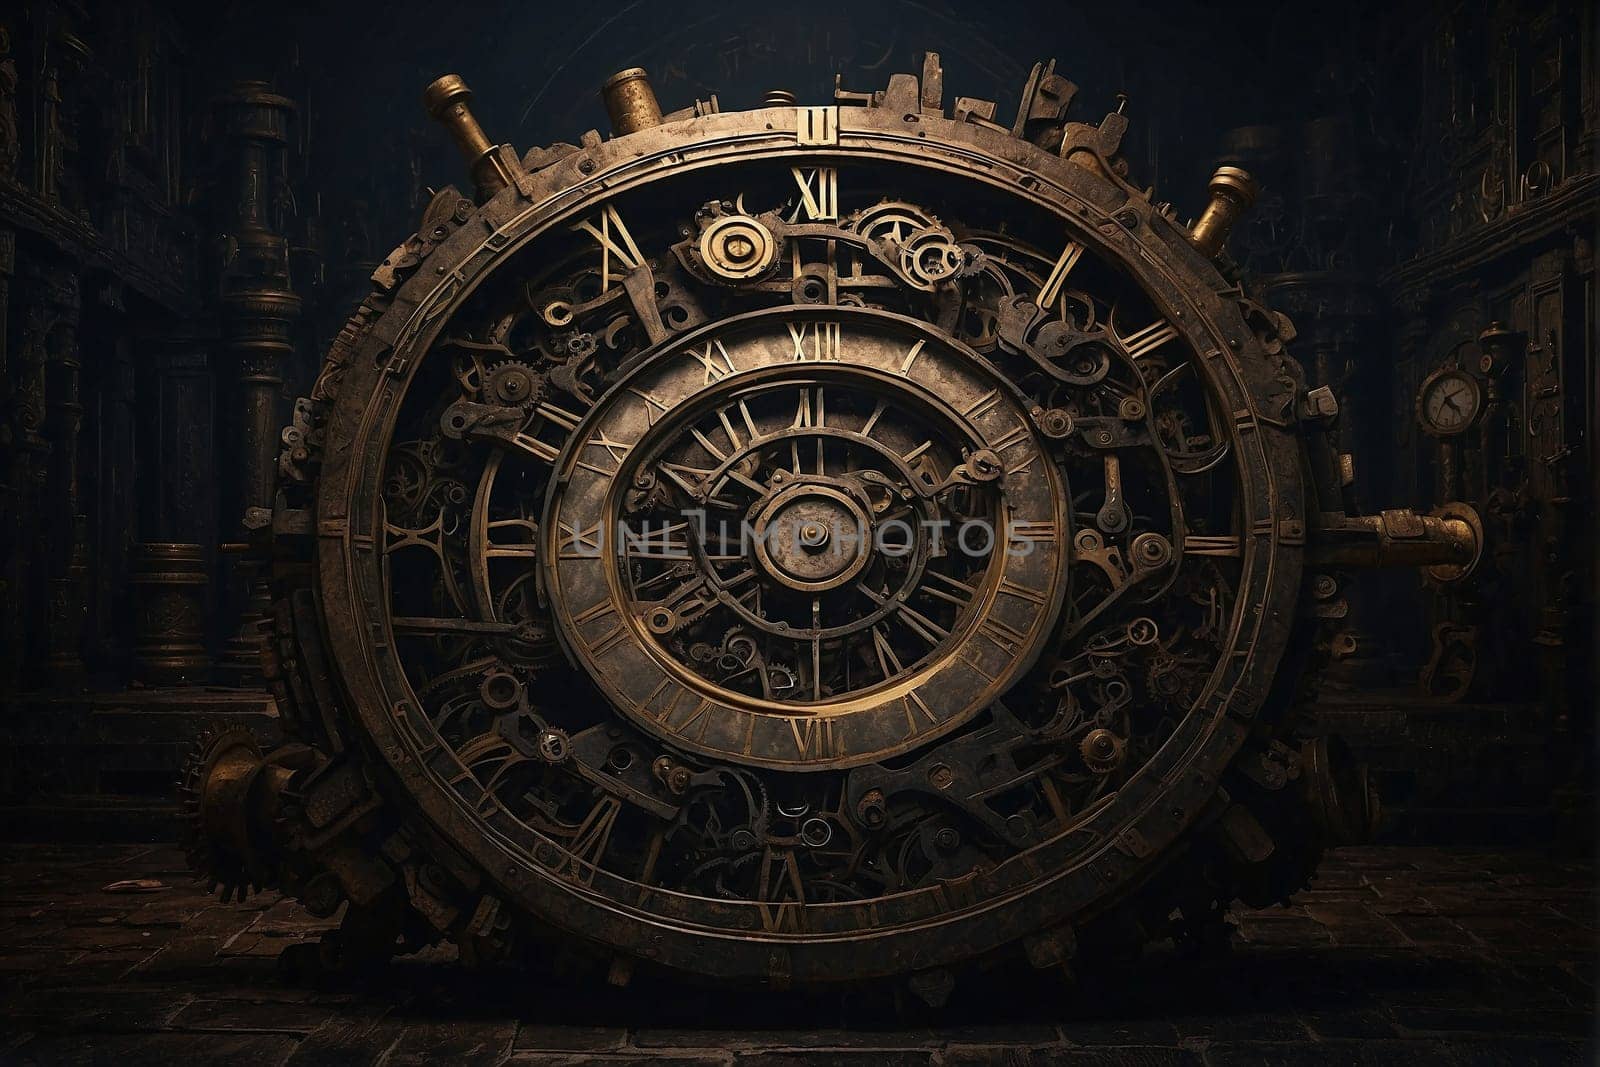 A solitary large metal clock hangs on the wall of a dimly lit room, providing a visual representation of passing time.